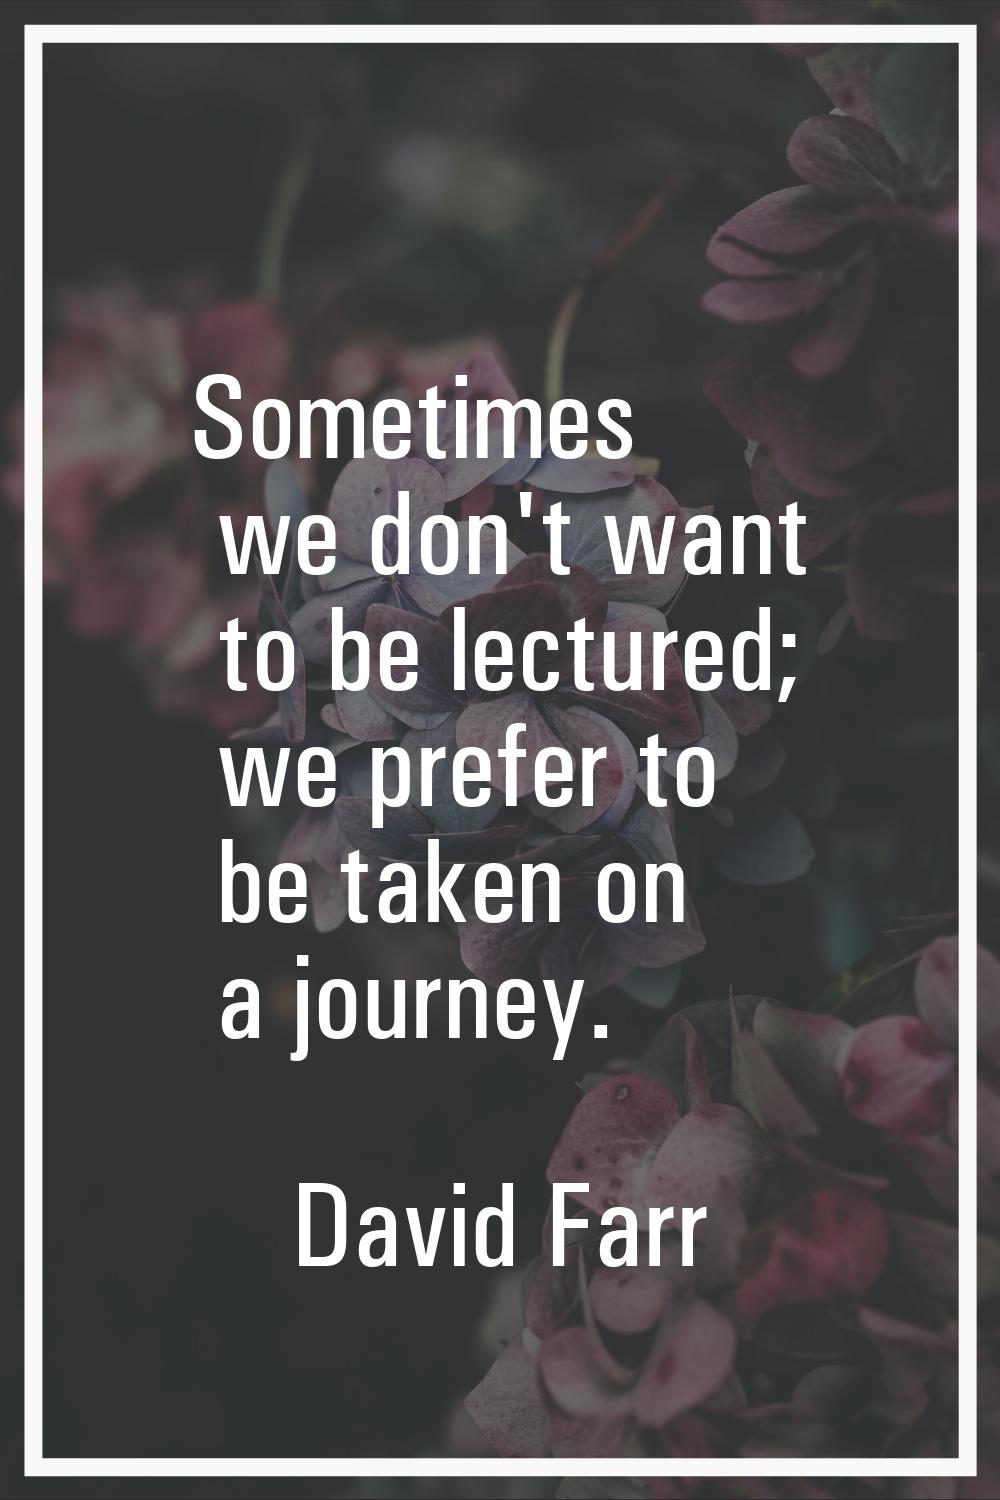 Sometimes we don't want to be lectured; we prefer to be taken on a journey.